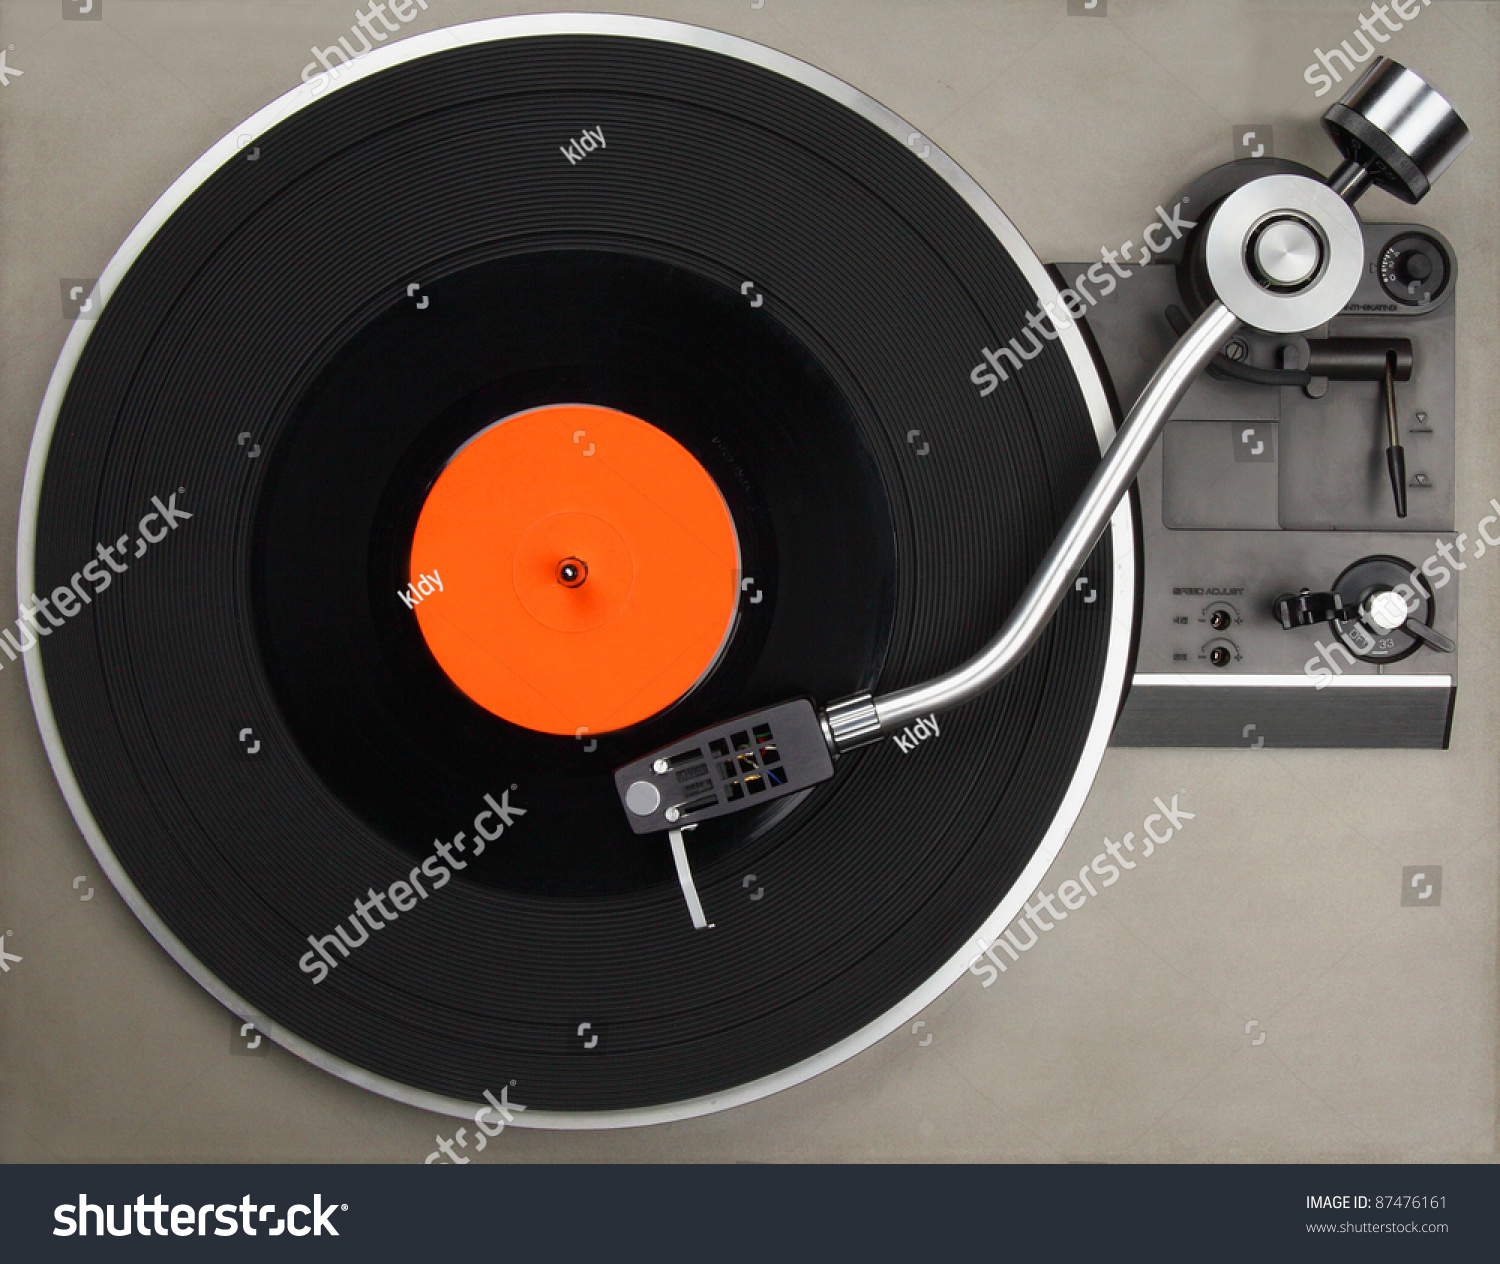 Vintage Record Player With Vinyl Record Stock Photo 87476161 